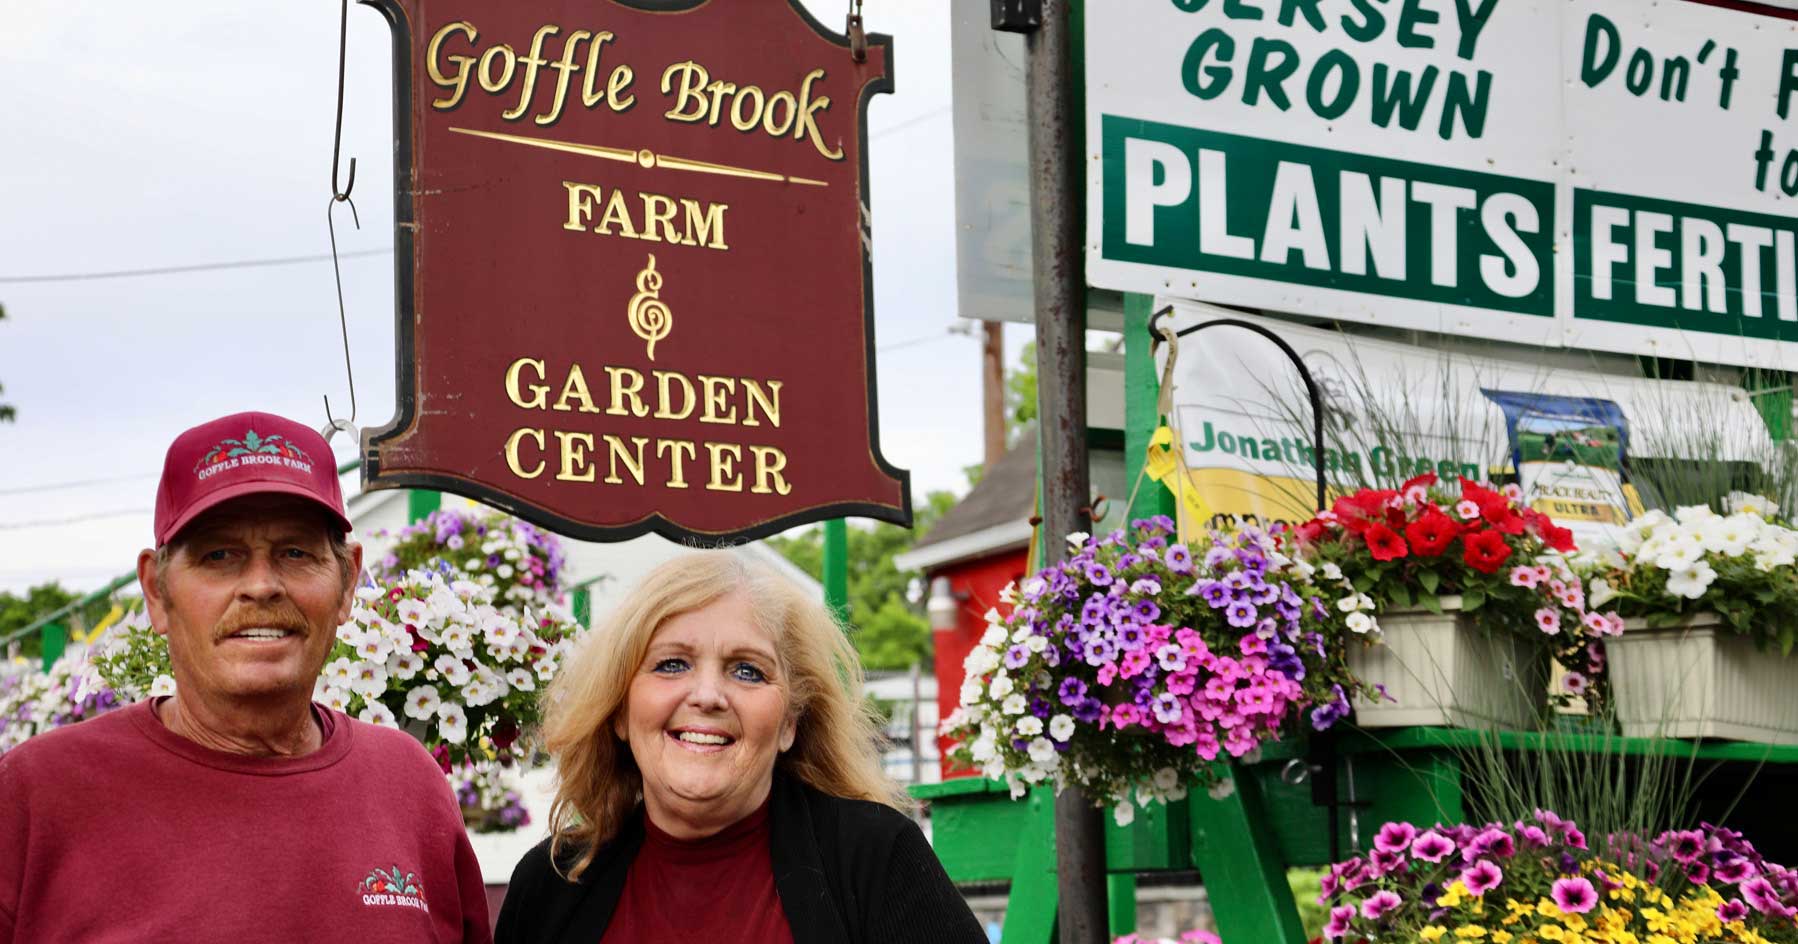 Today, Goffle Brook Farm is run by Richard and Dancy’s daughter Donna Dorsey, along with their son-in-law Kurt Dorsey. Although both parents are now deceased, the family traditions remain alive and well. 